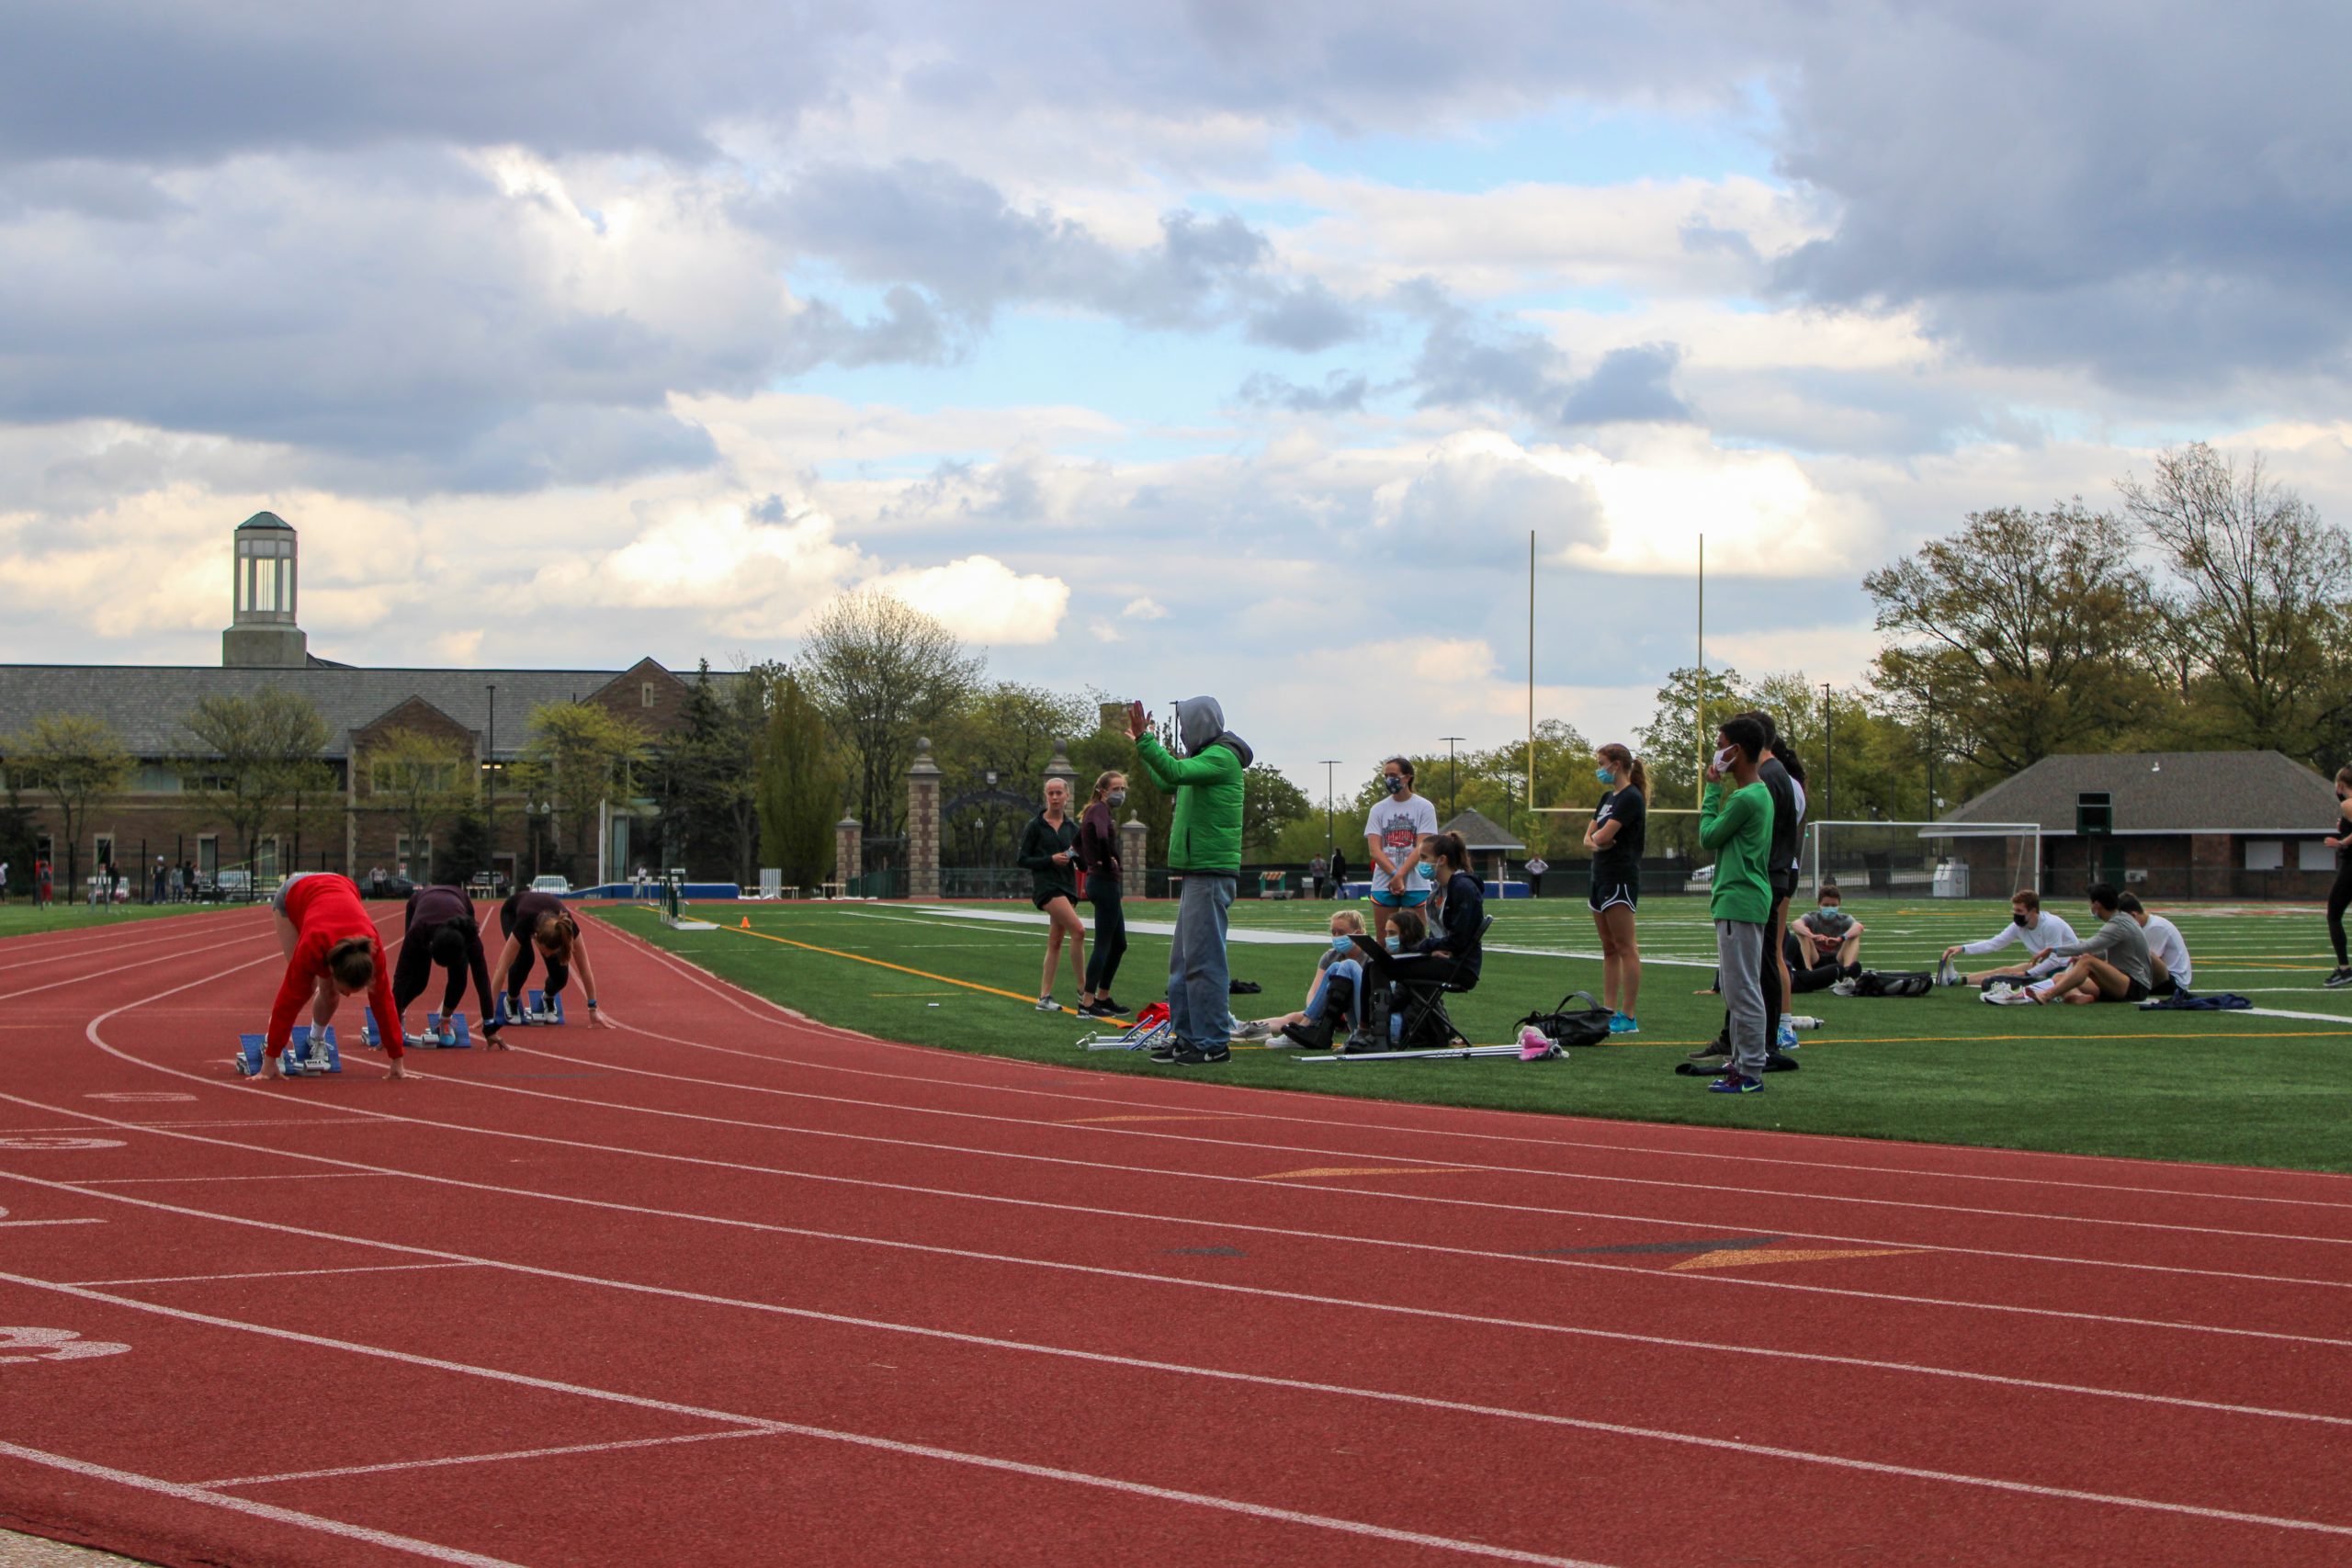 Three runners lean forward with their feet against blocks on a red track, as observers watch them from the green interior of the track underneath a partly cloudy sky.